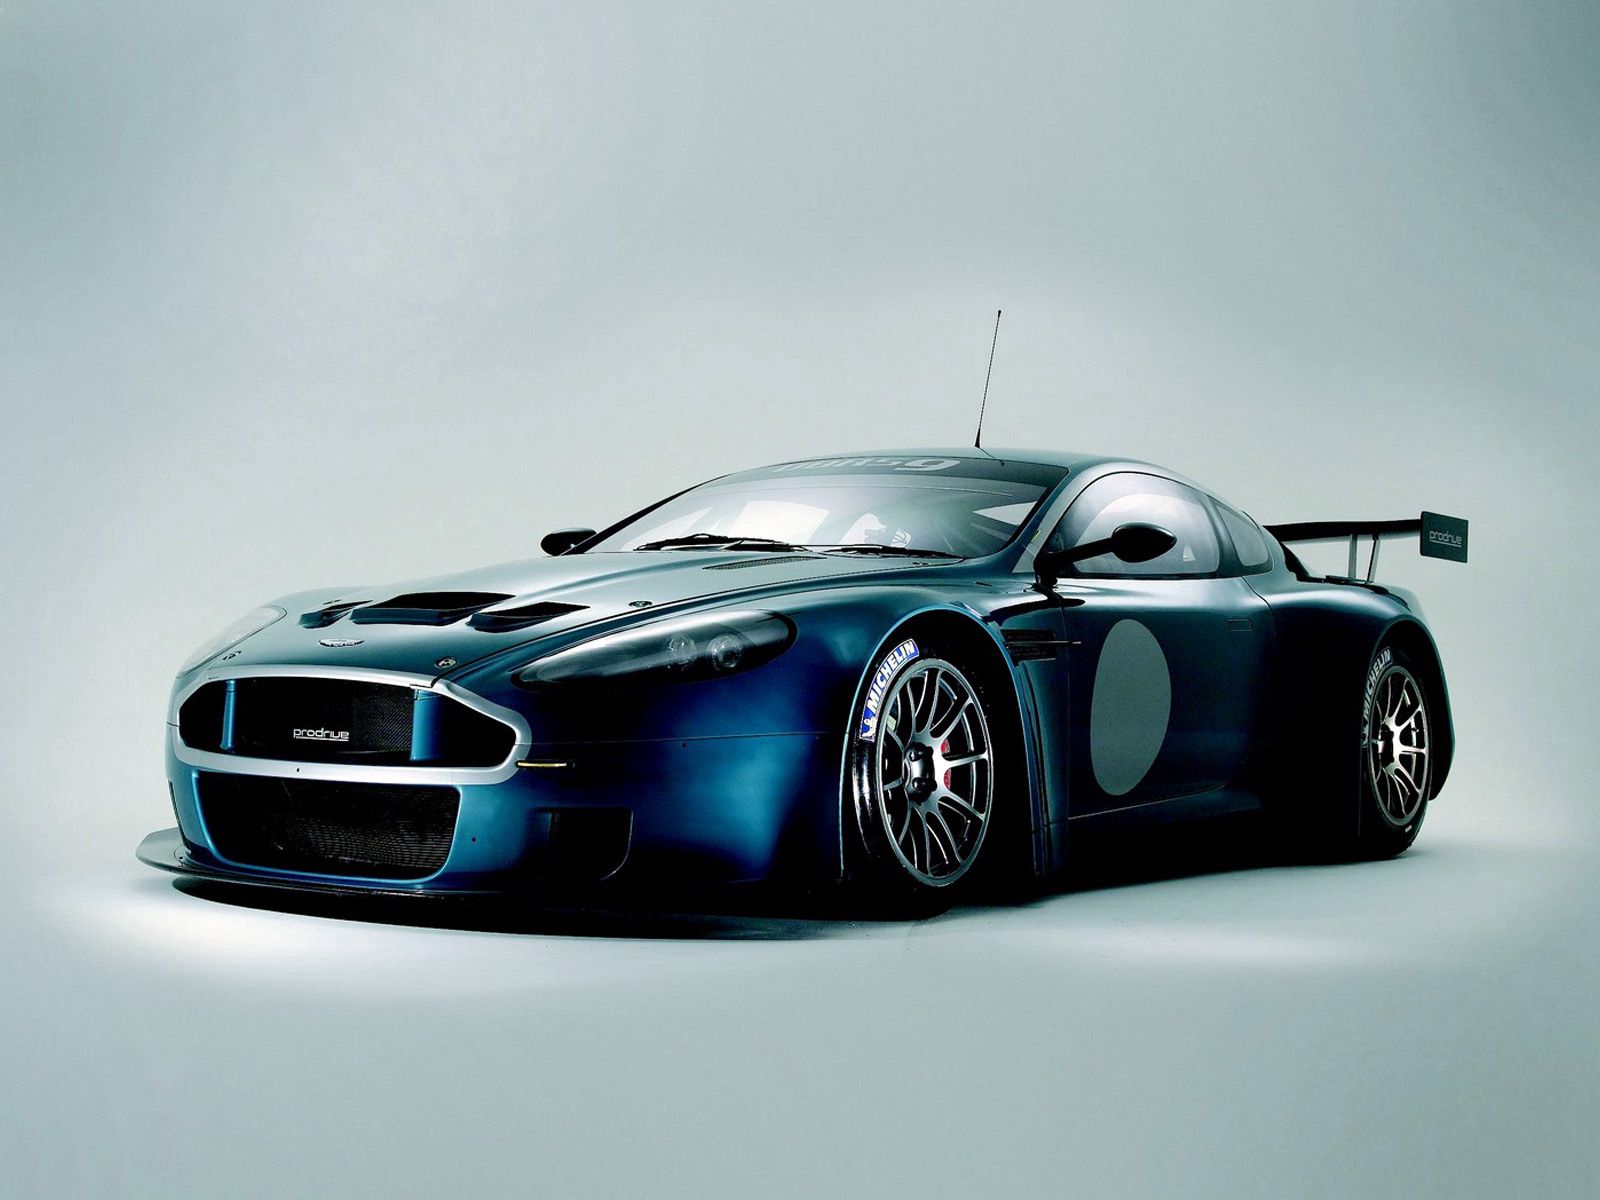 front view, sports, auto, aston martin, cars, blue, style, 2005, dbrs9